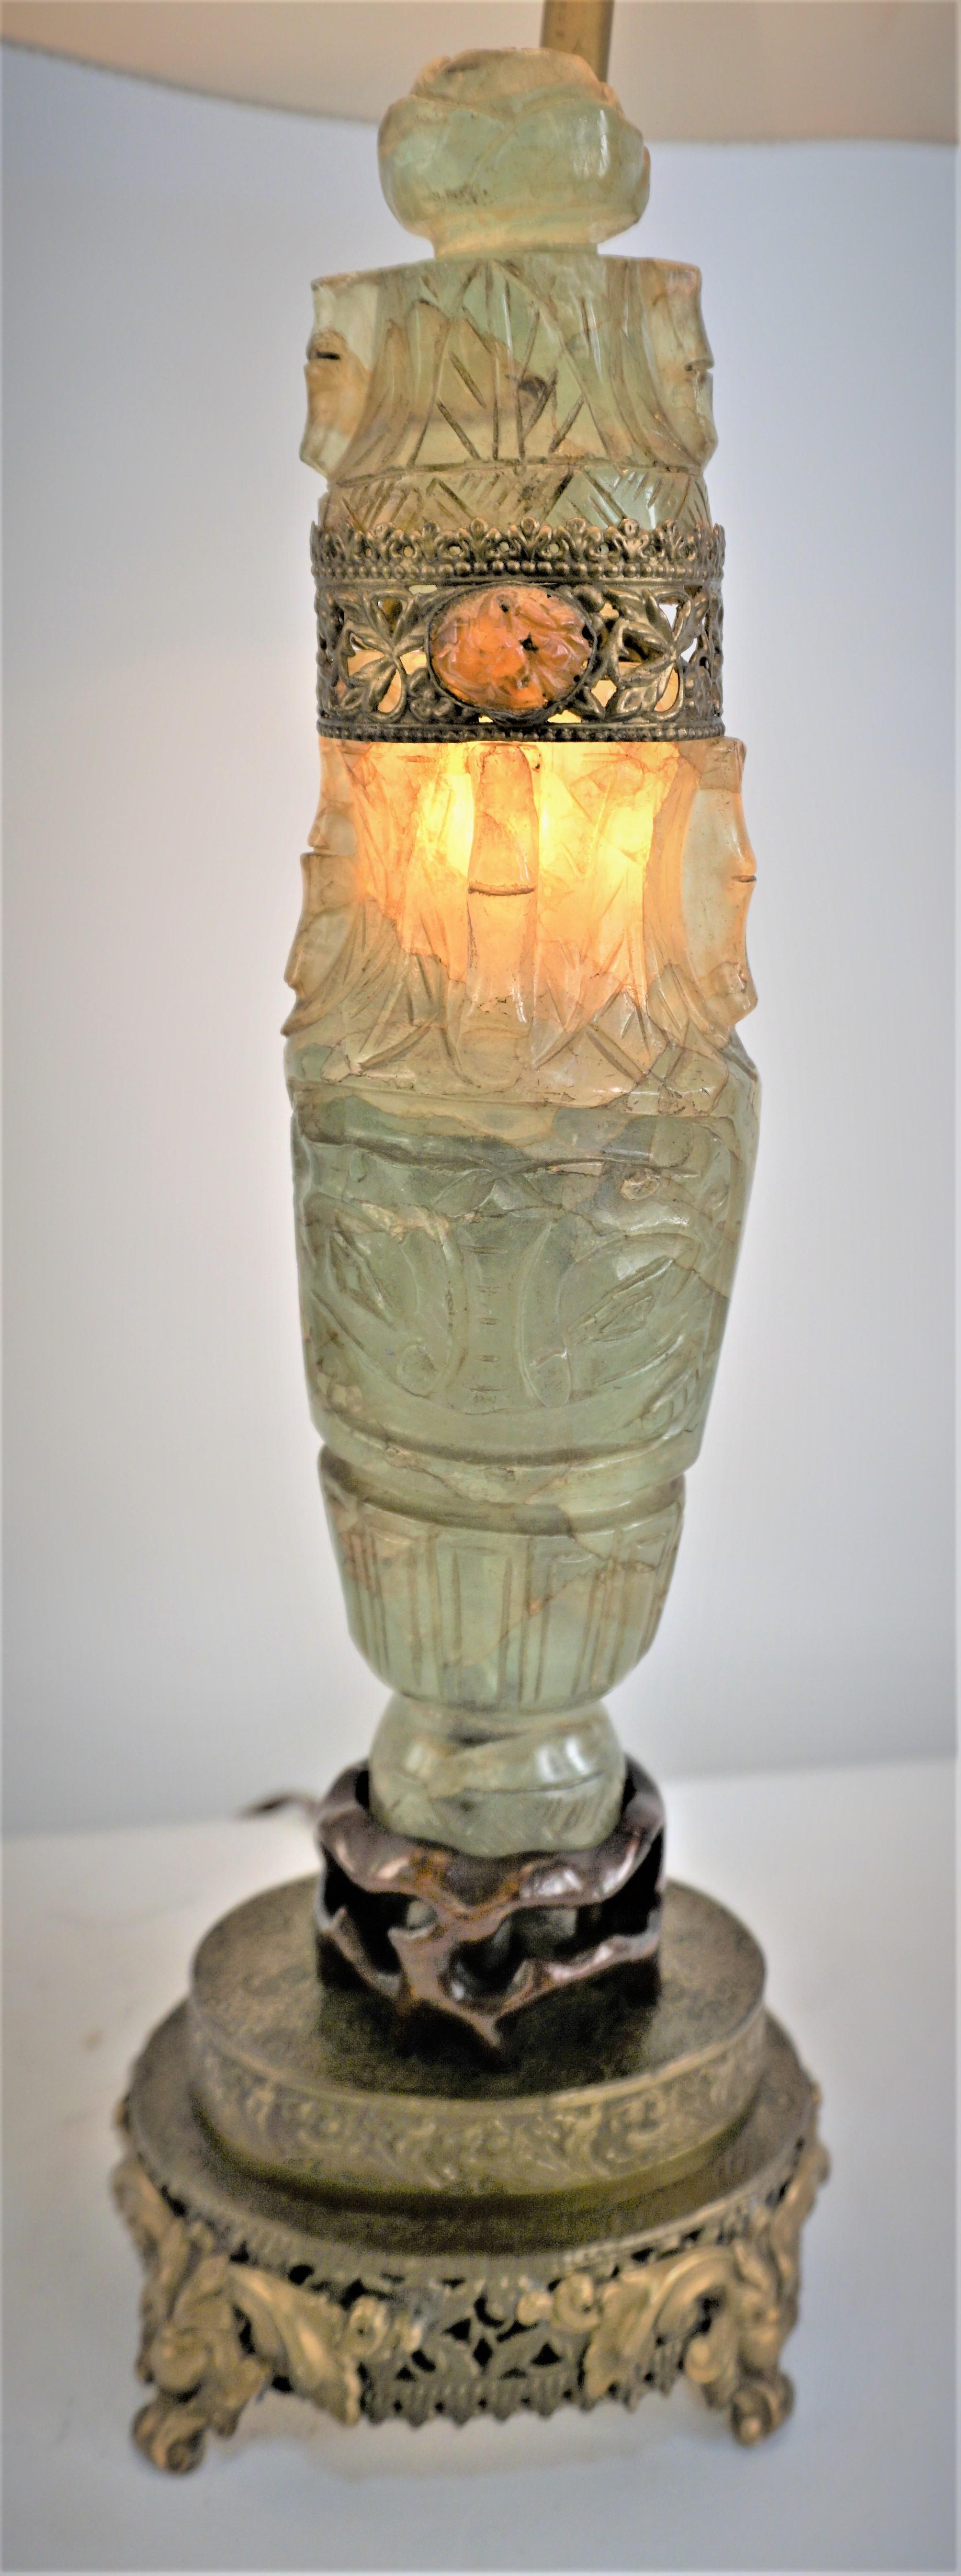 Antique Chines hand carved green jade table Lamp with rosewood and brass base, there is night light inside the green jade.
This lamp is fitted with handmade silk lampshade.
Professionally rewired and measurement include the lampshade. 